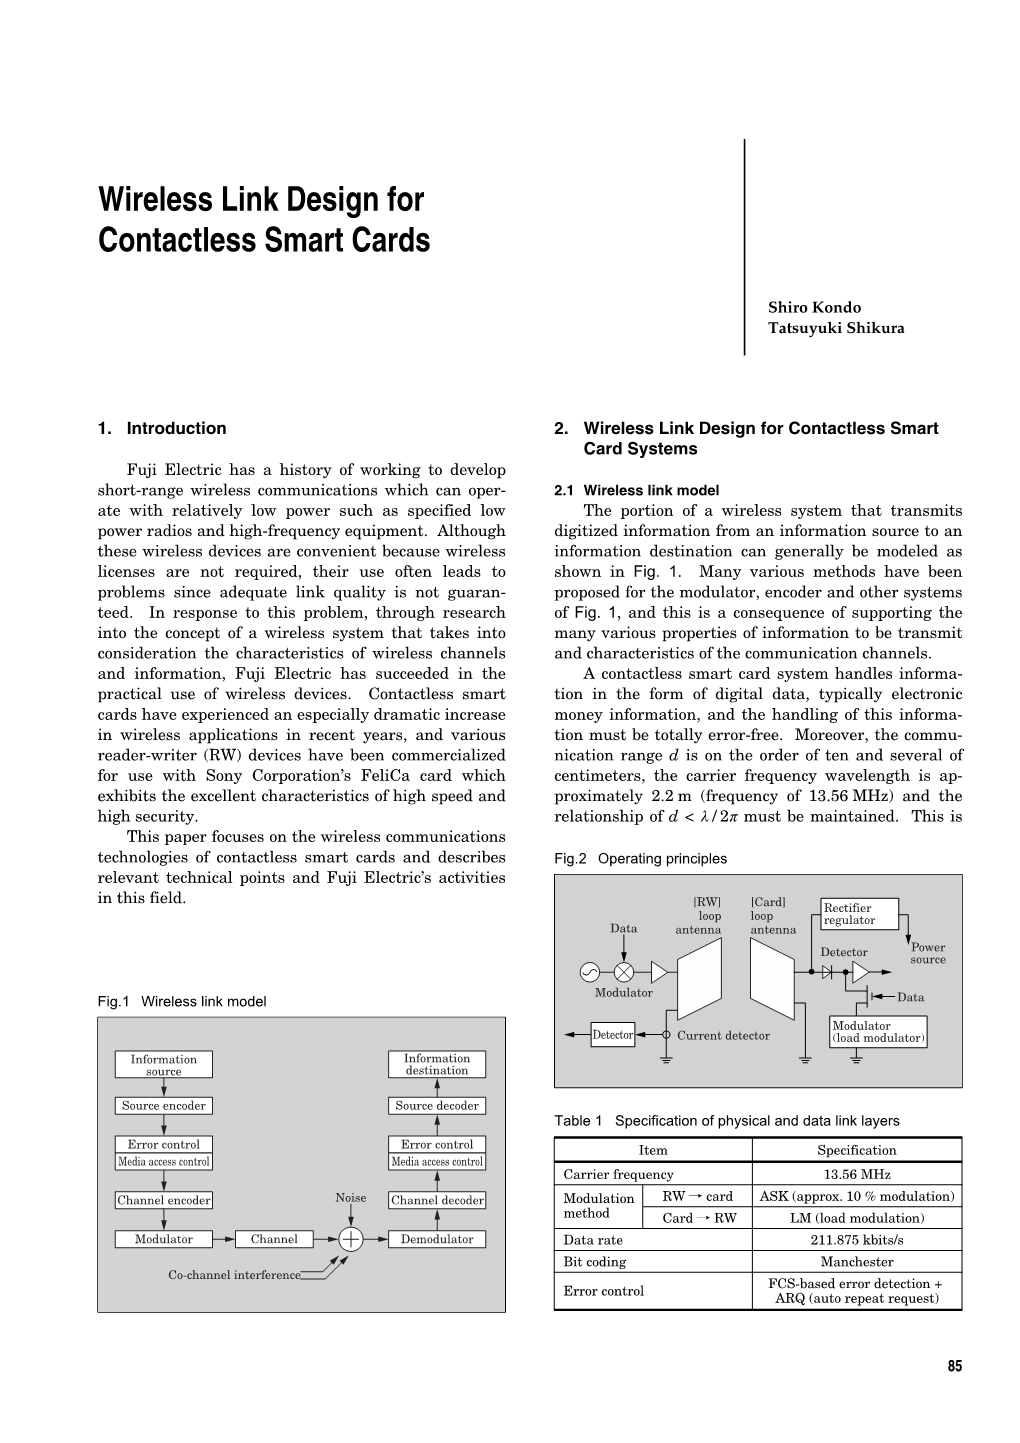 Wireless Link Design for Contactless Smart Cards